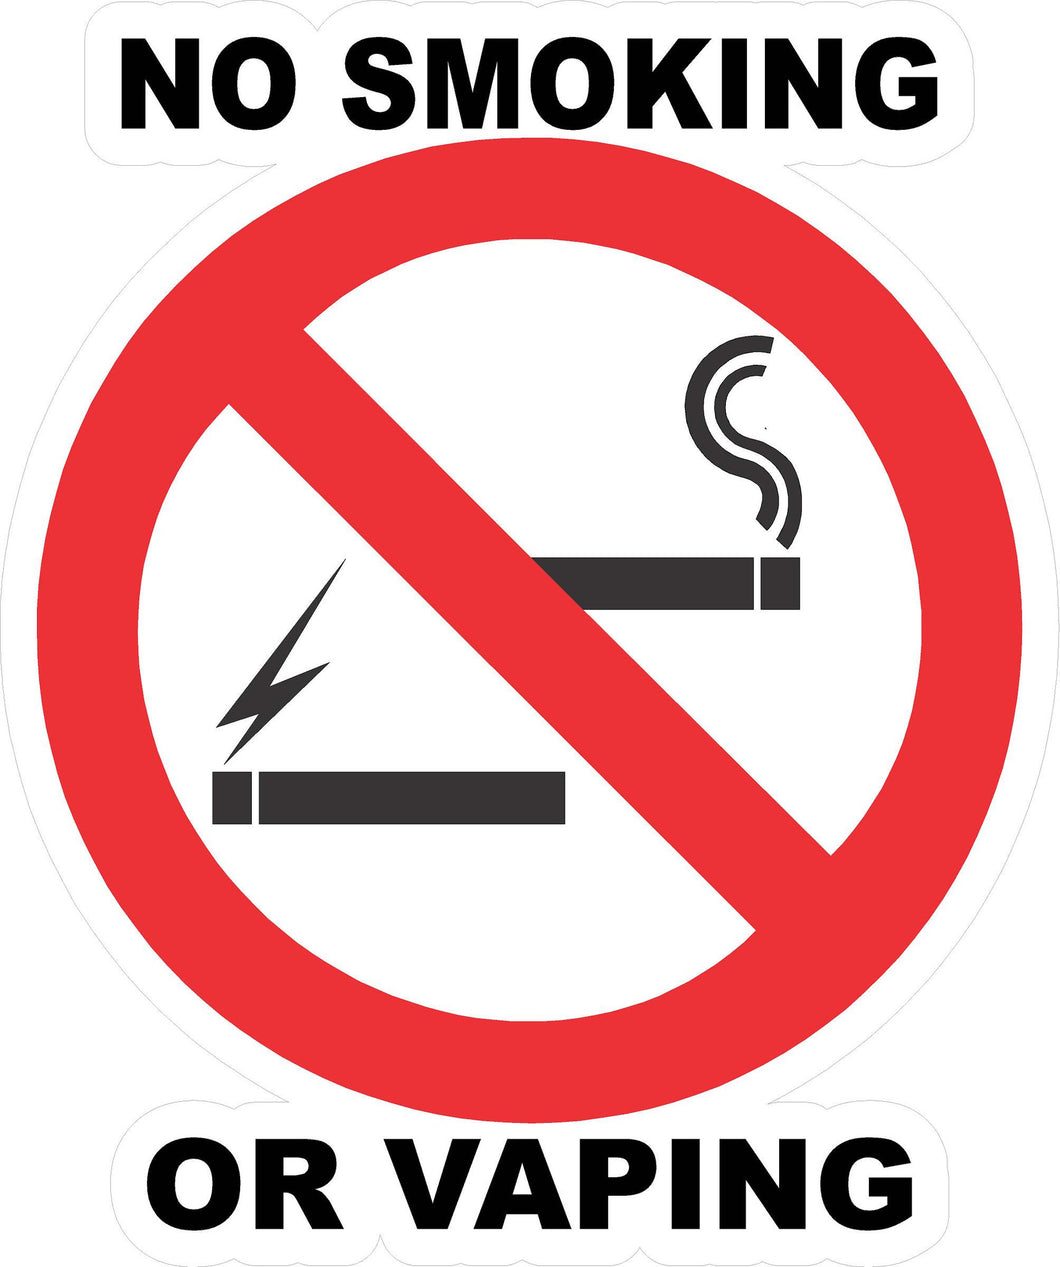 No Smoking or Vaping Decal - Signs & Decals by SalaGraphics